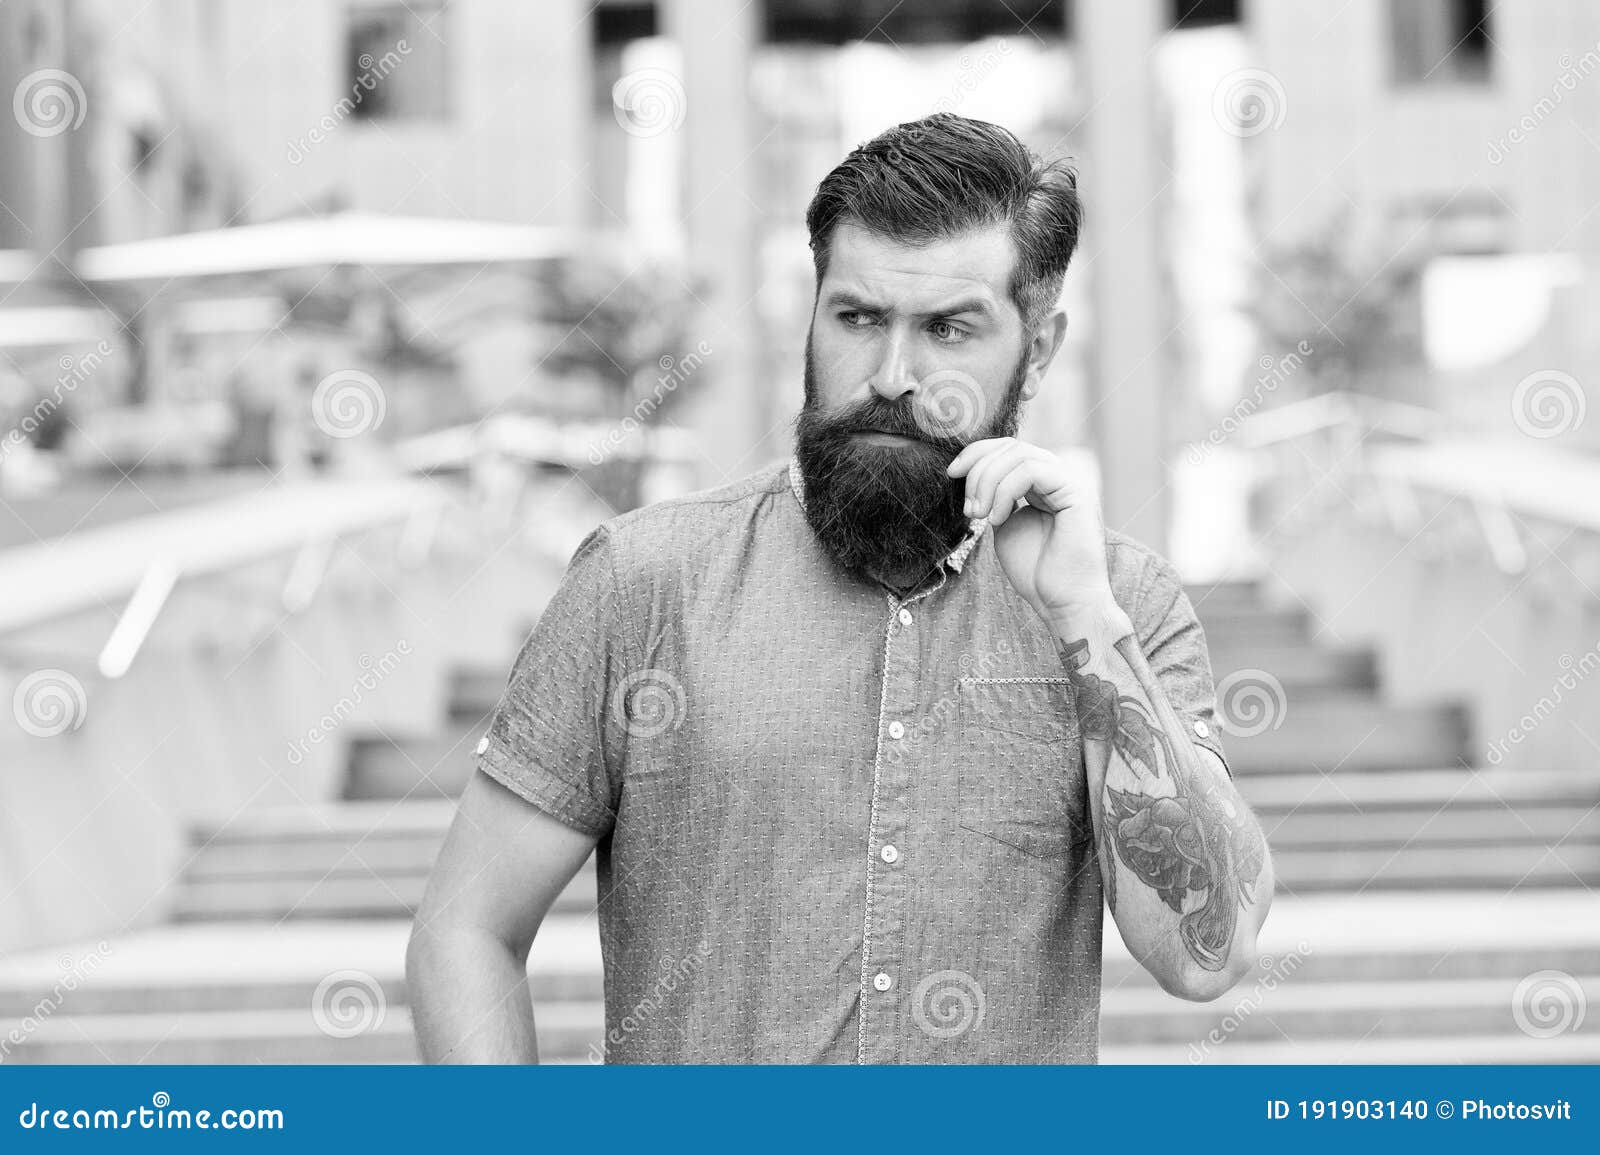 Guy with Beard and Mustache. Barber Salon. Street Style. Walking Down ...